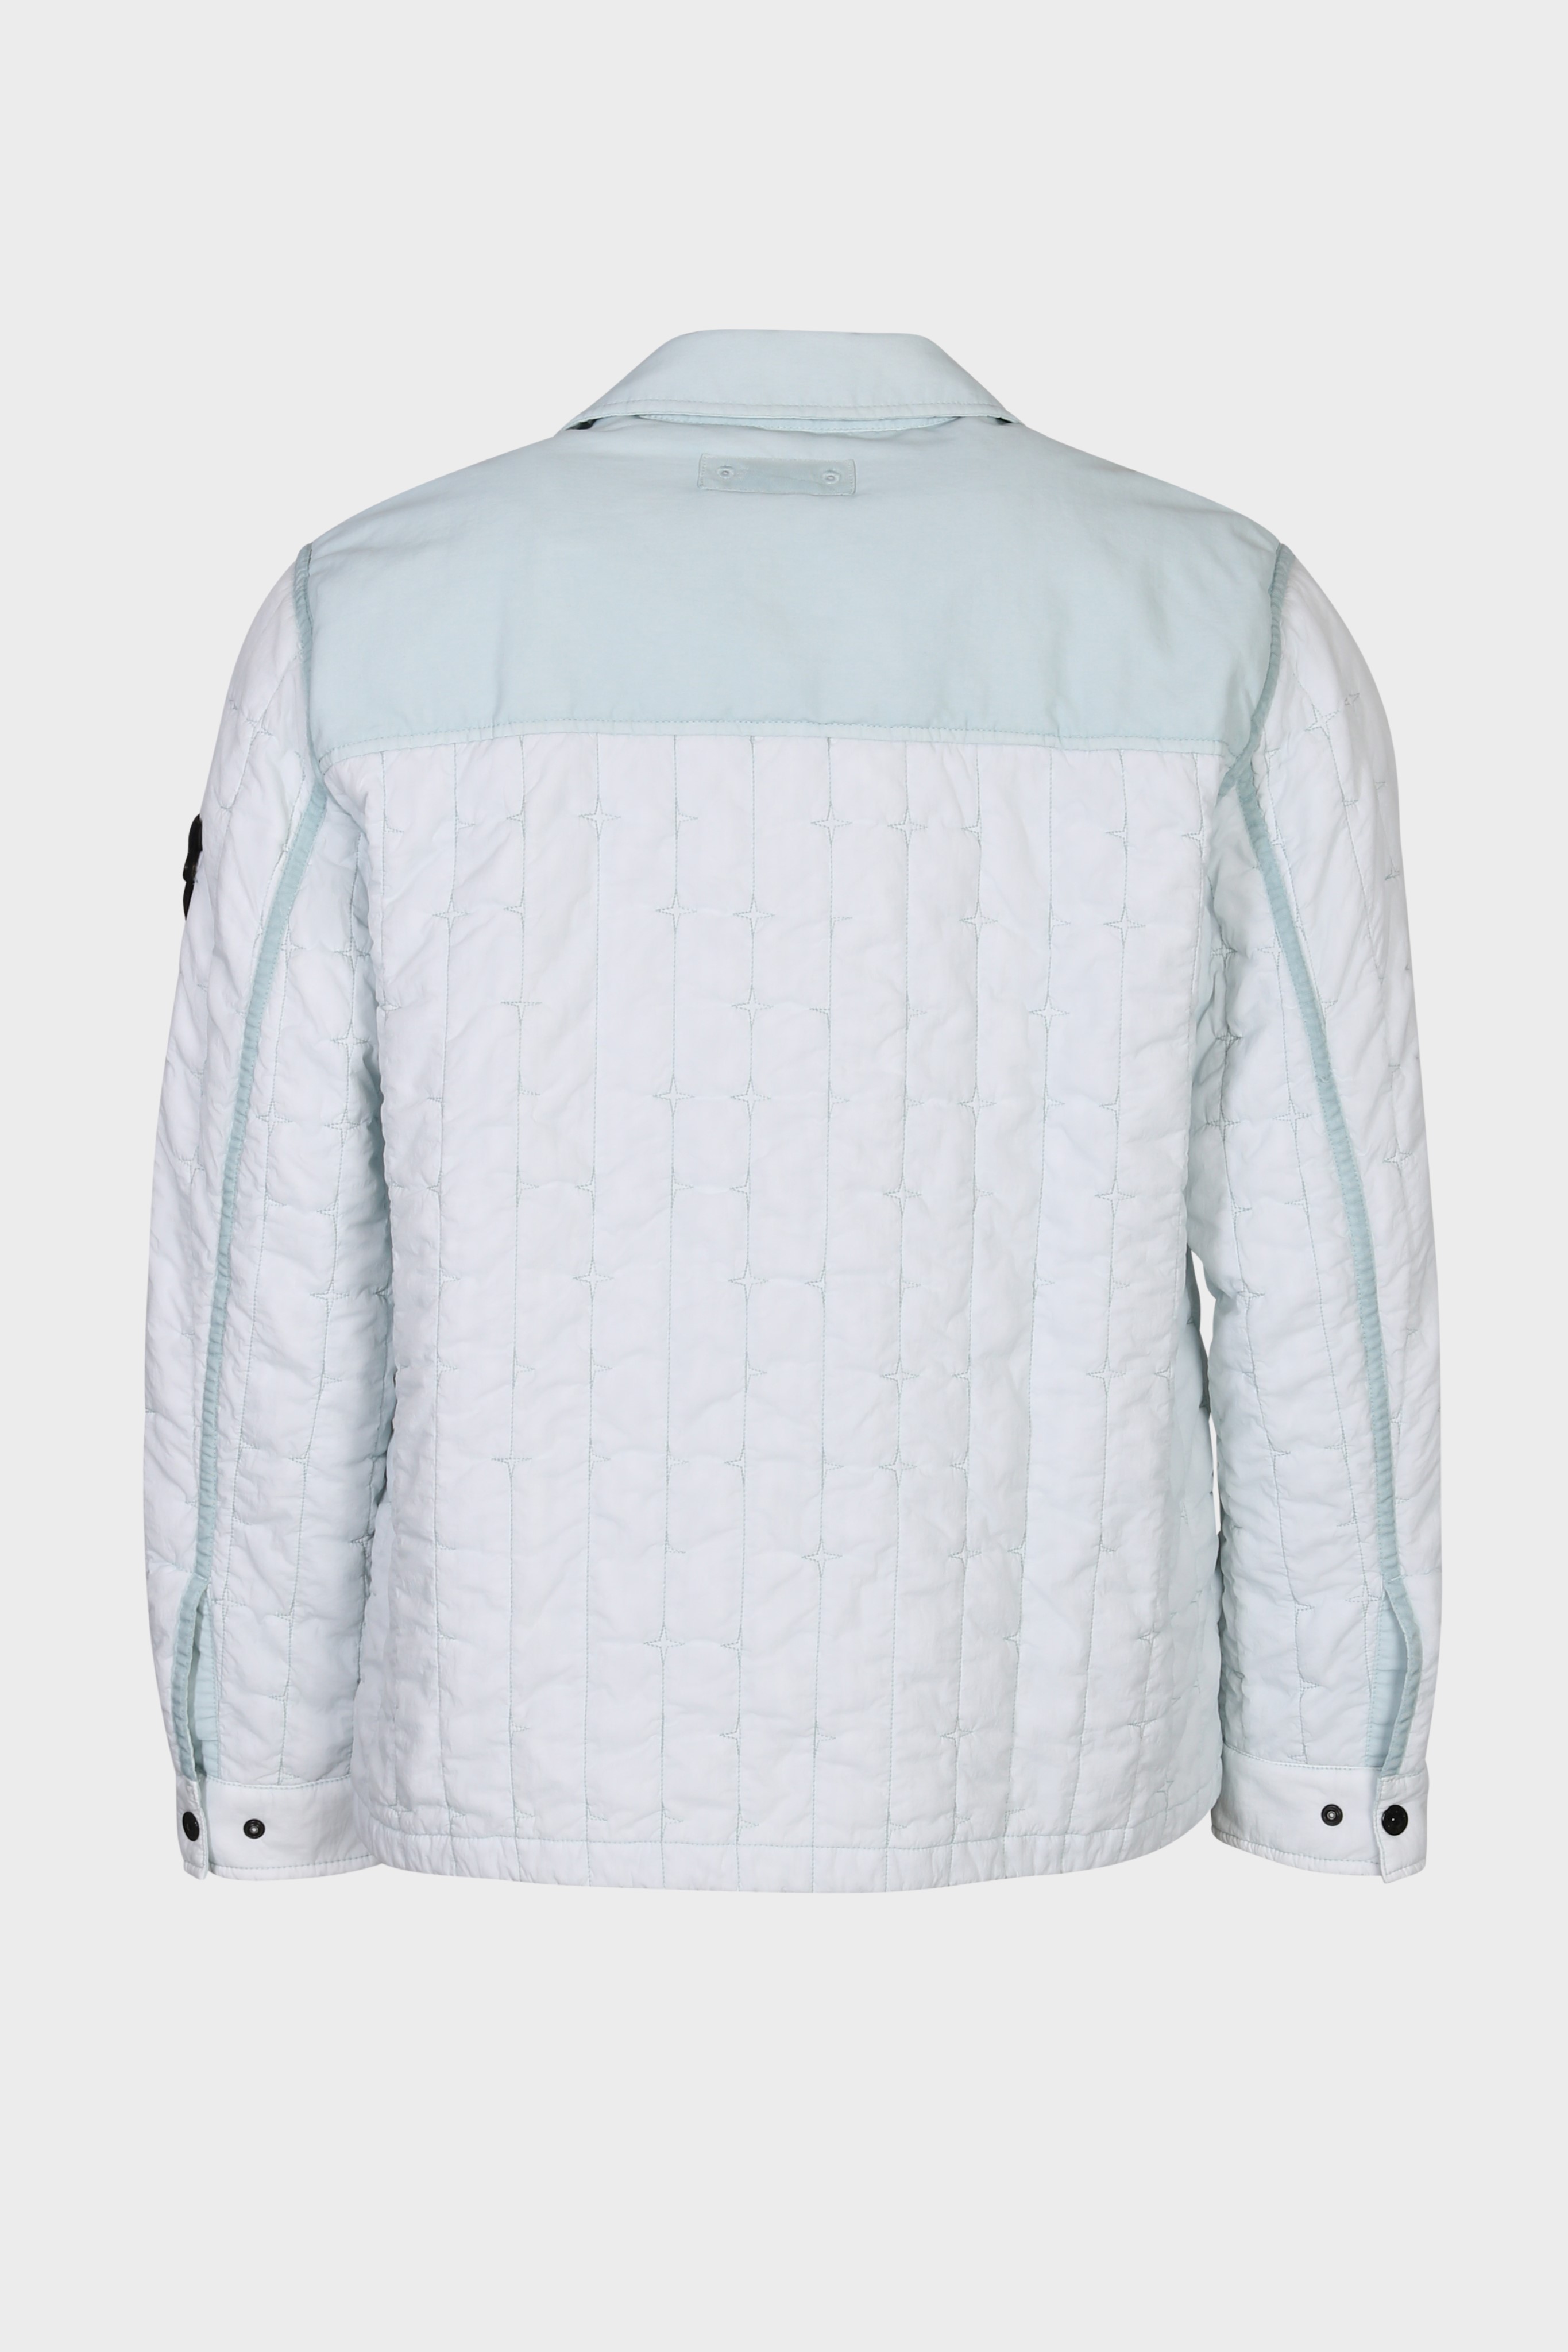 STONE ISLAND Quilted Nylon Stella Jacket in Sky Blue S